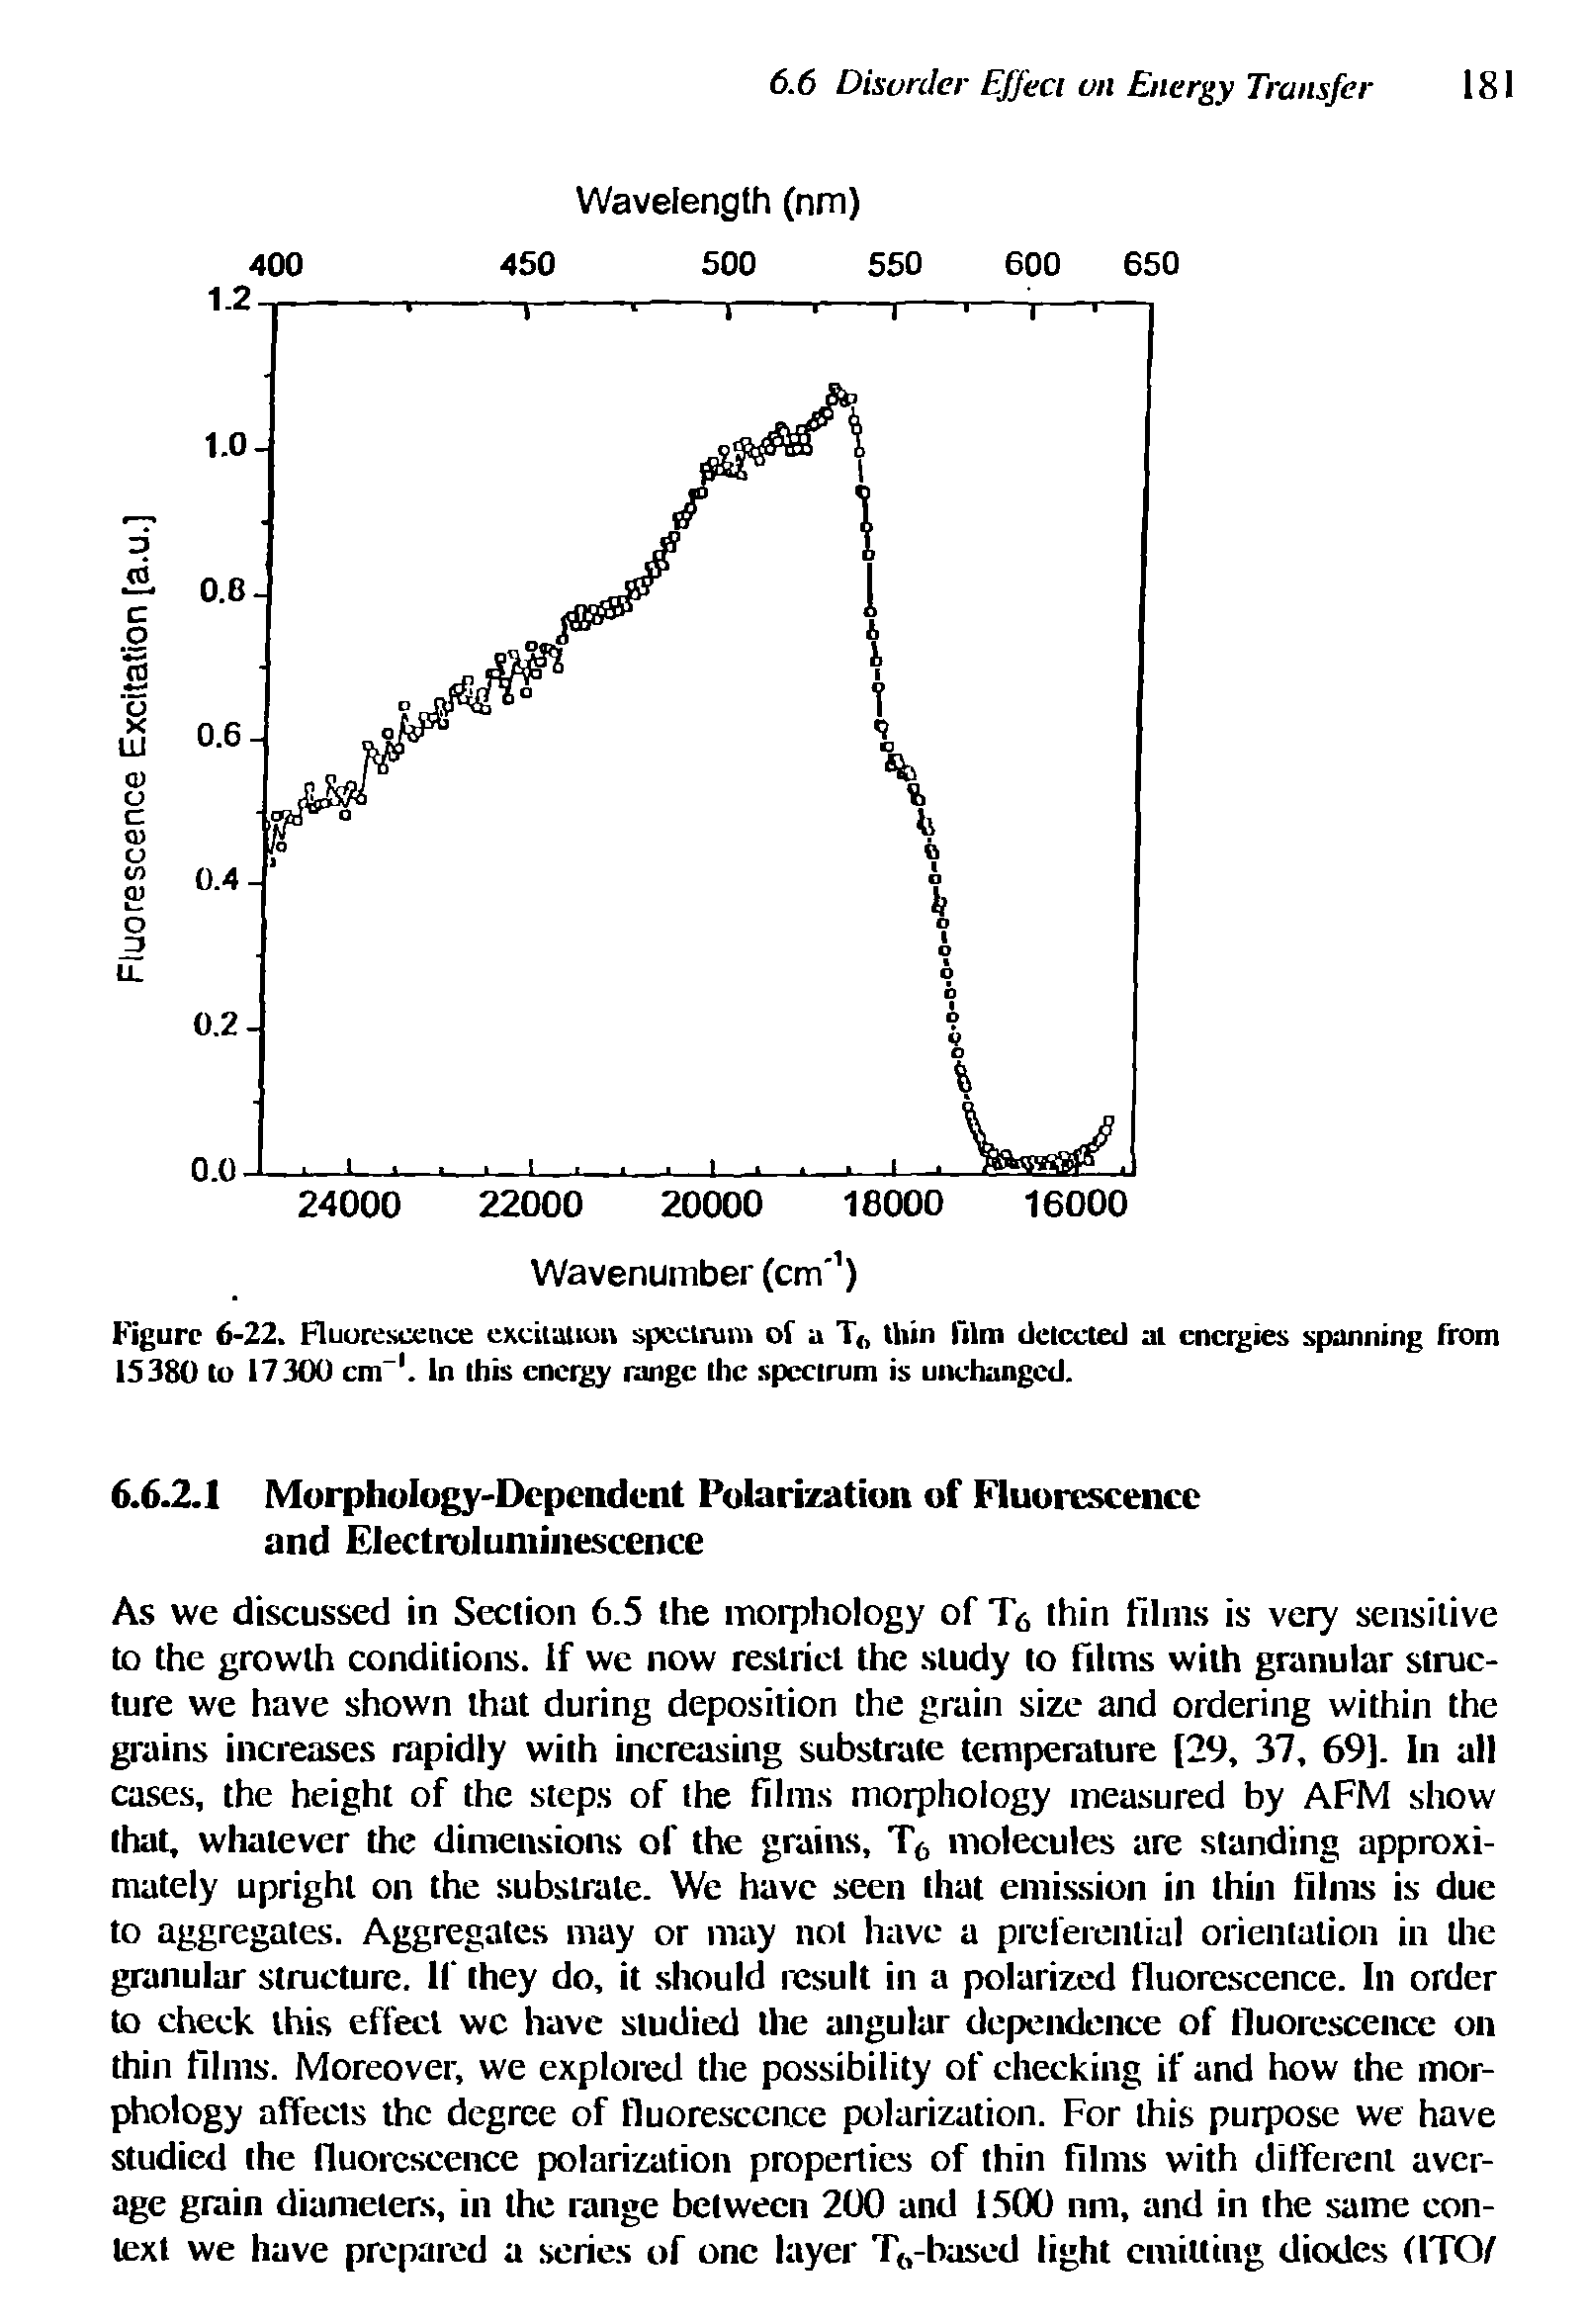 Figure 6-22. Fluorescence exciuuon spectrum of a T() thin film detected at energies spanning from 15380 to 17300 cm-1. In this energy range the spectrum is unchanged.